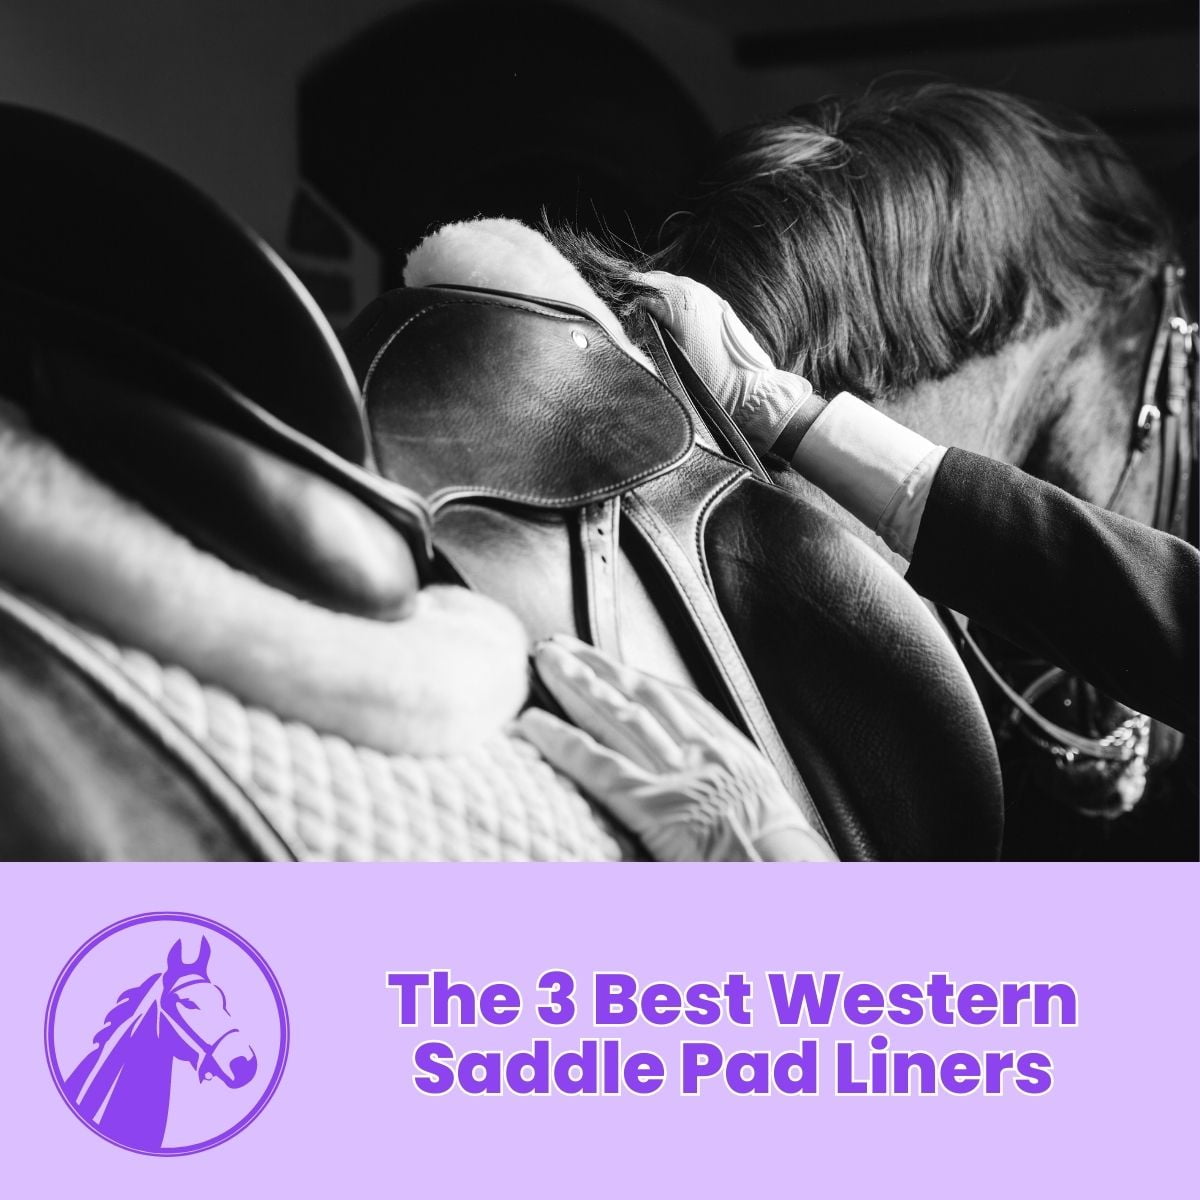 You are currently viewing The 3 Best Western Saddle Pad Liners